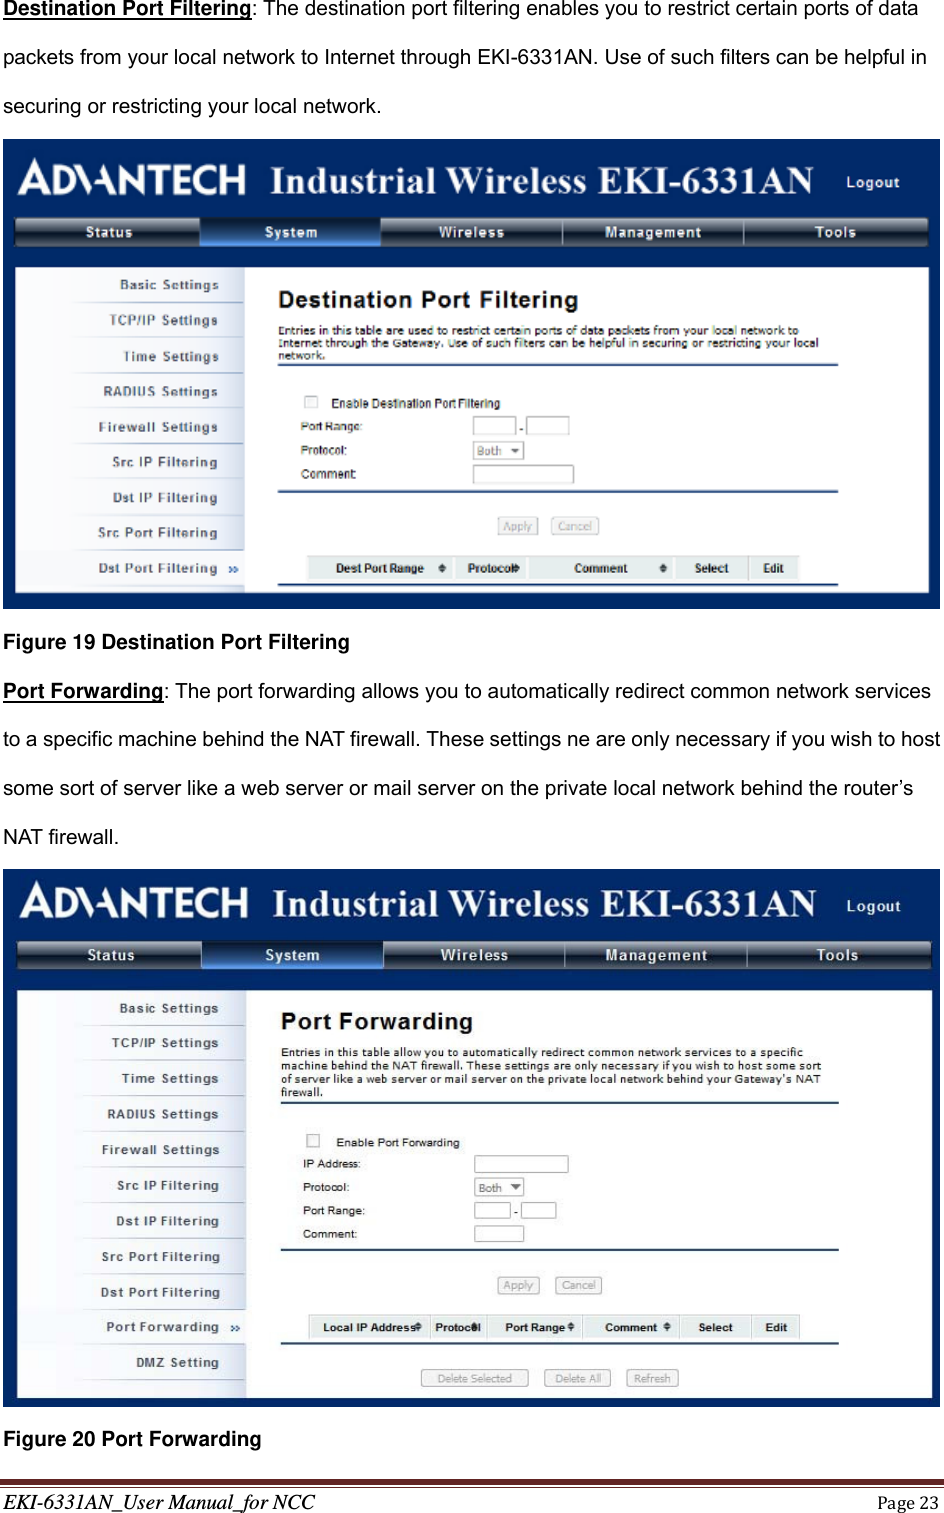 EKI-6331AN_User Manual_for NCCPage23Destination Port Filtering: The destination port filtering enables you to restrict certain ports of data packets from your local network to Internet through EKI-6331AN. Use of such filters can be helpful in securing or restricting your local network.  Figure 19 Destination Port Filtering Port Forwarding: The port forwarding allows you to automatically redirect common network services to a specific machine behind the NAT firewall. These settings ne are only necessary if you wish to host some sort of server like a web server or mail server on the private local network behind the router’s NAT firewall.  Figure 20 Port Forwarding 